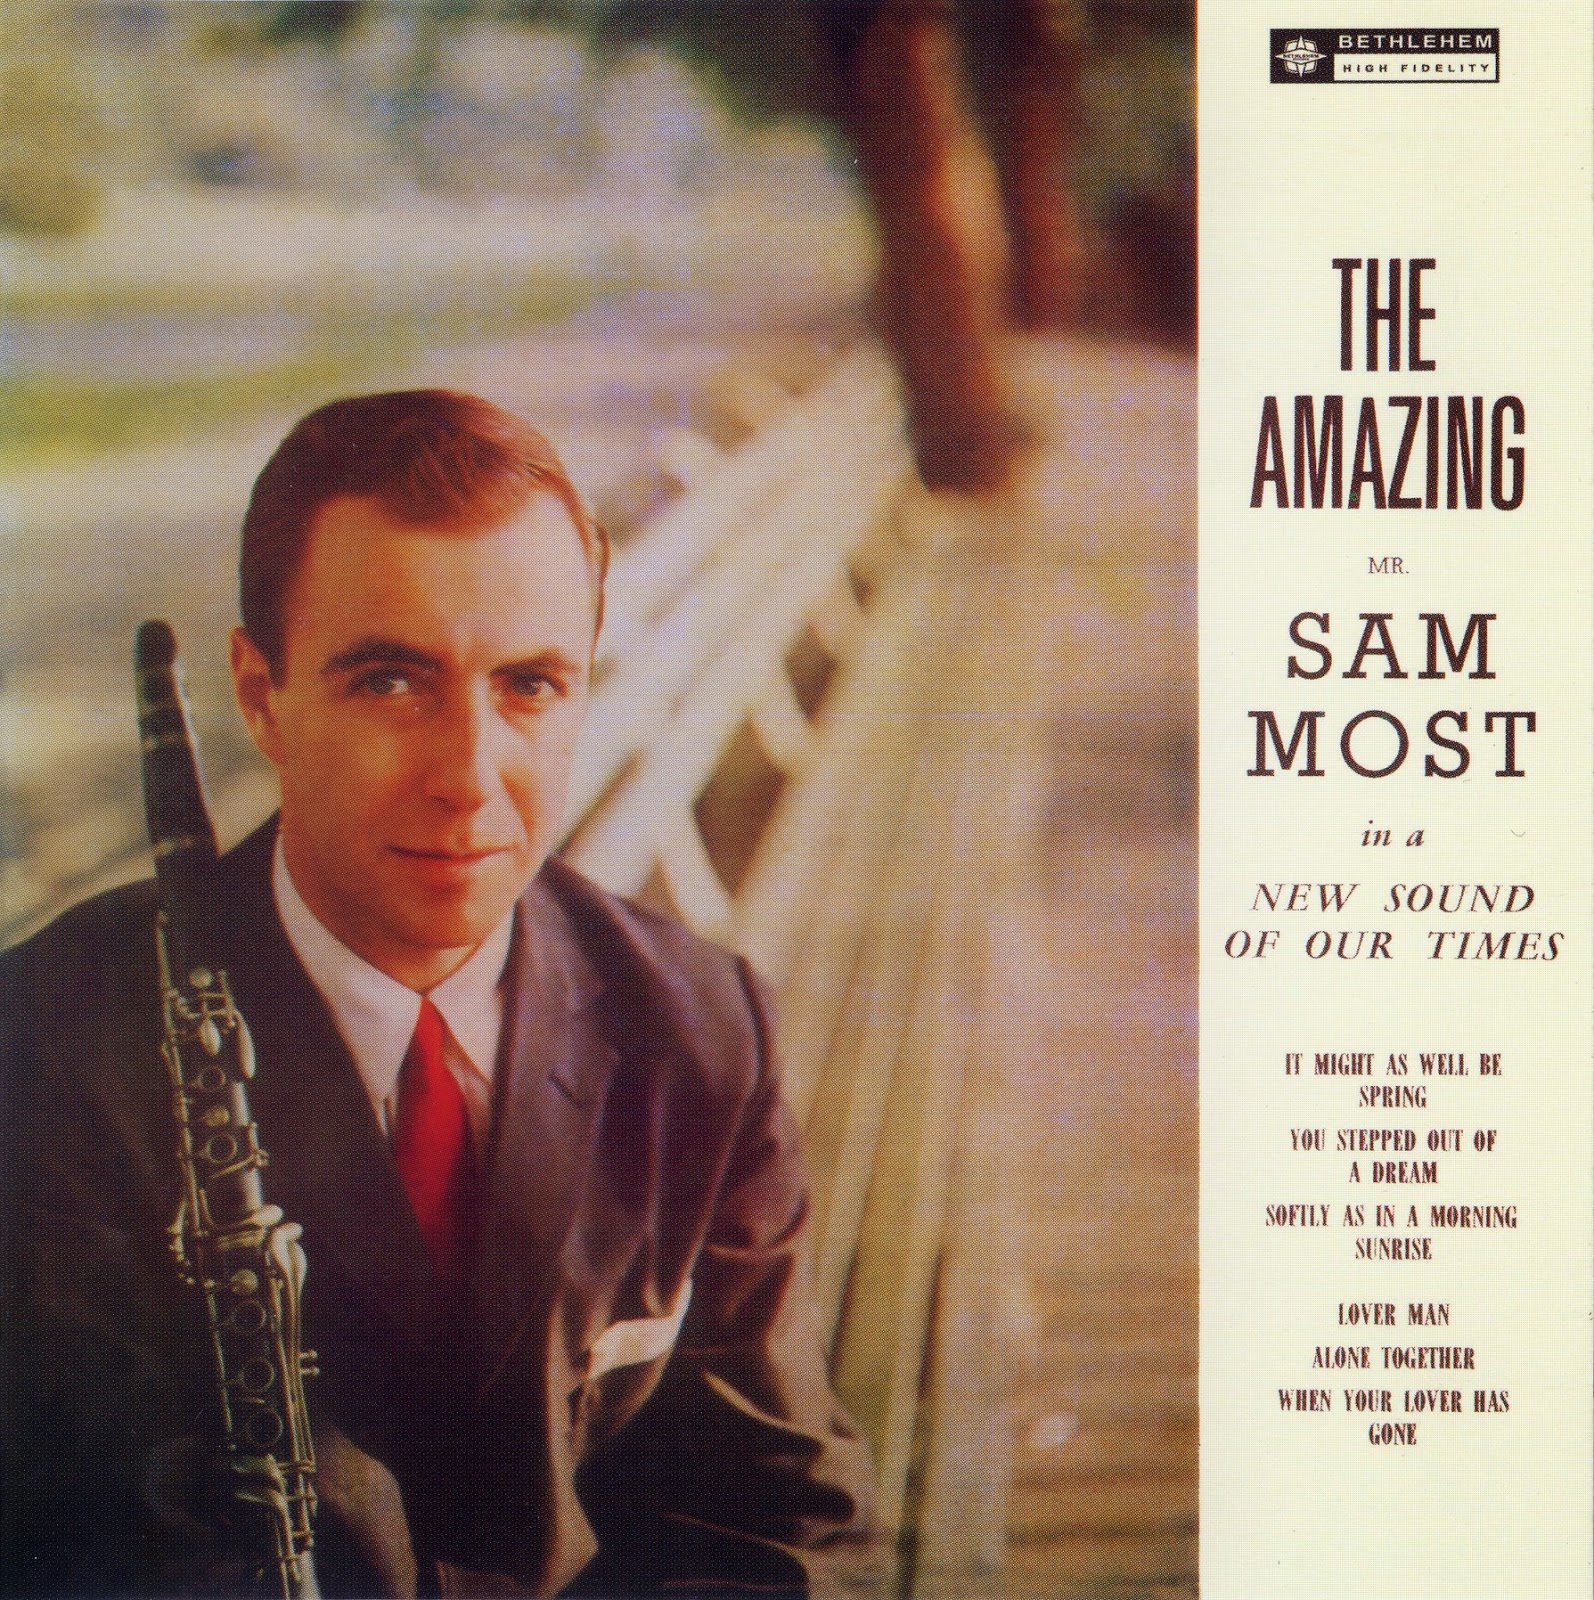 SAM MOST - The Amazing Mr. Sam Most cover 